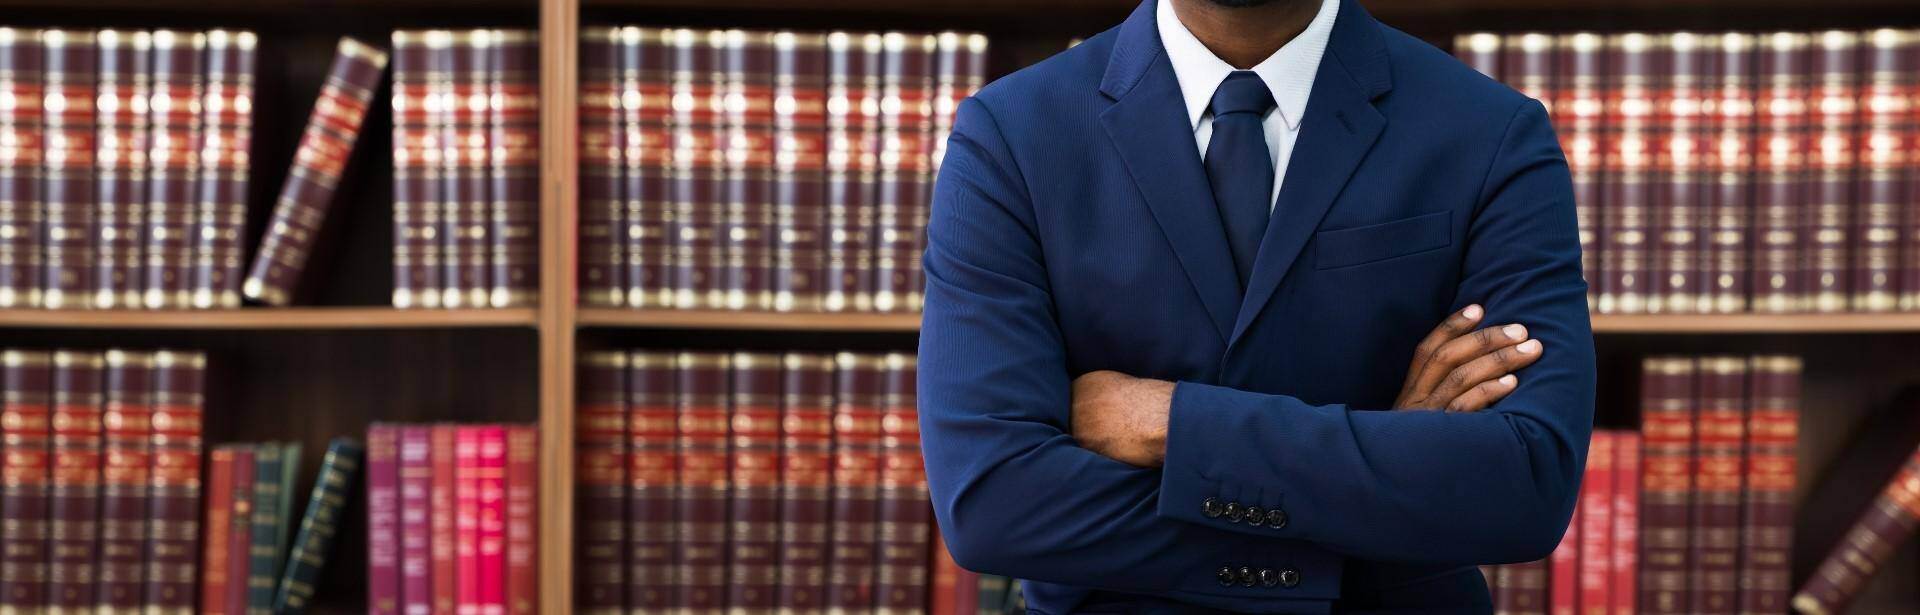 A black lawyer standing in front of a bookshelf of law book in Stonecrest, Georgia